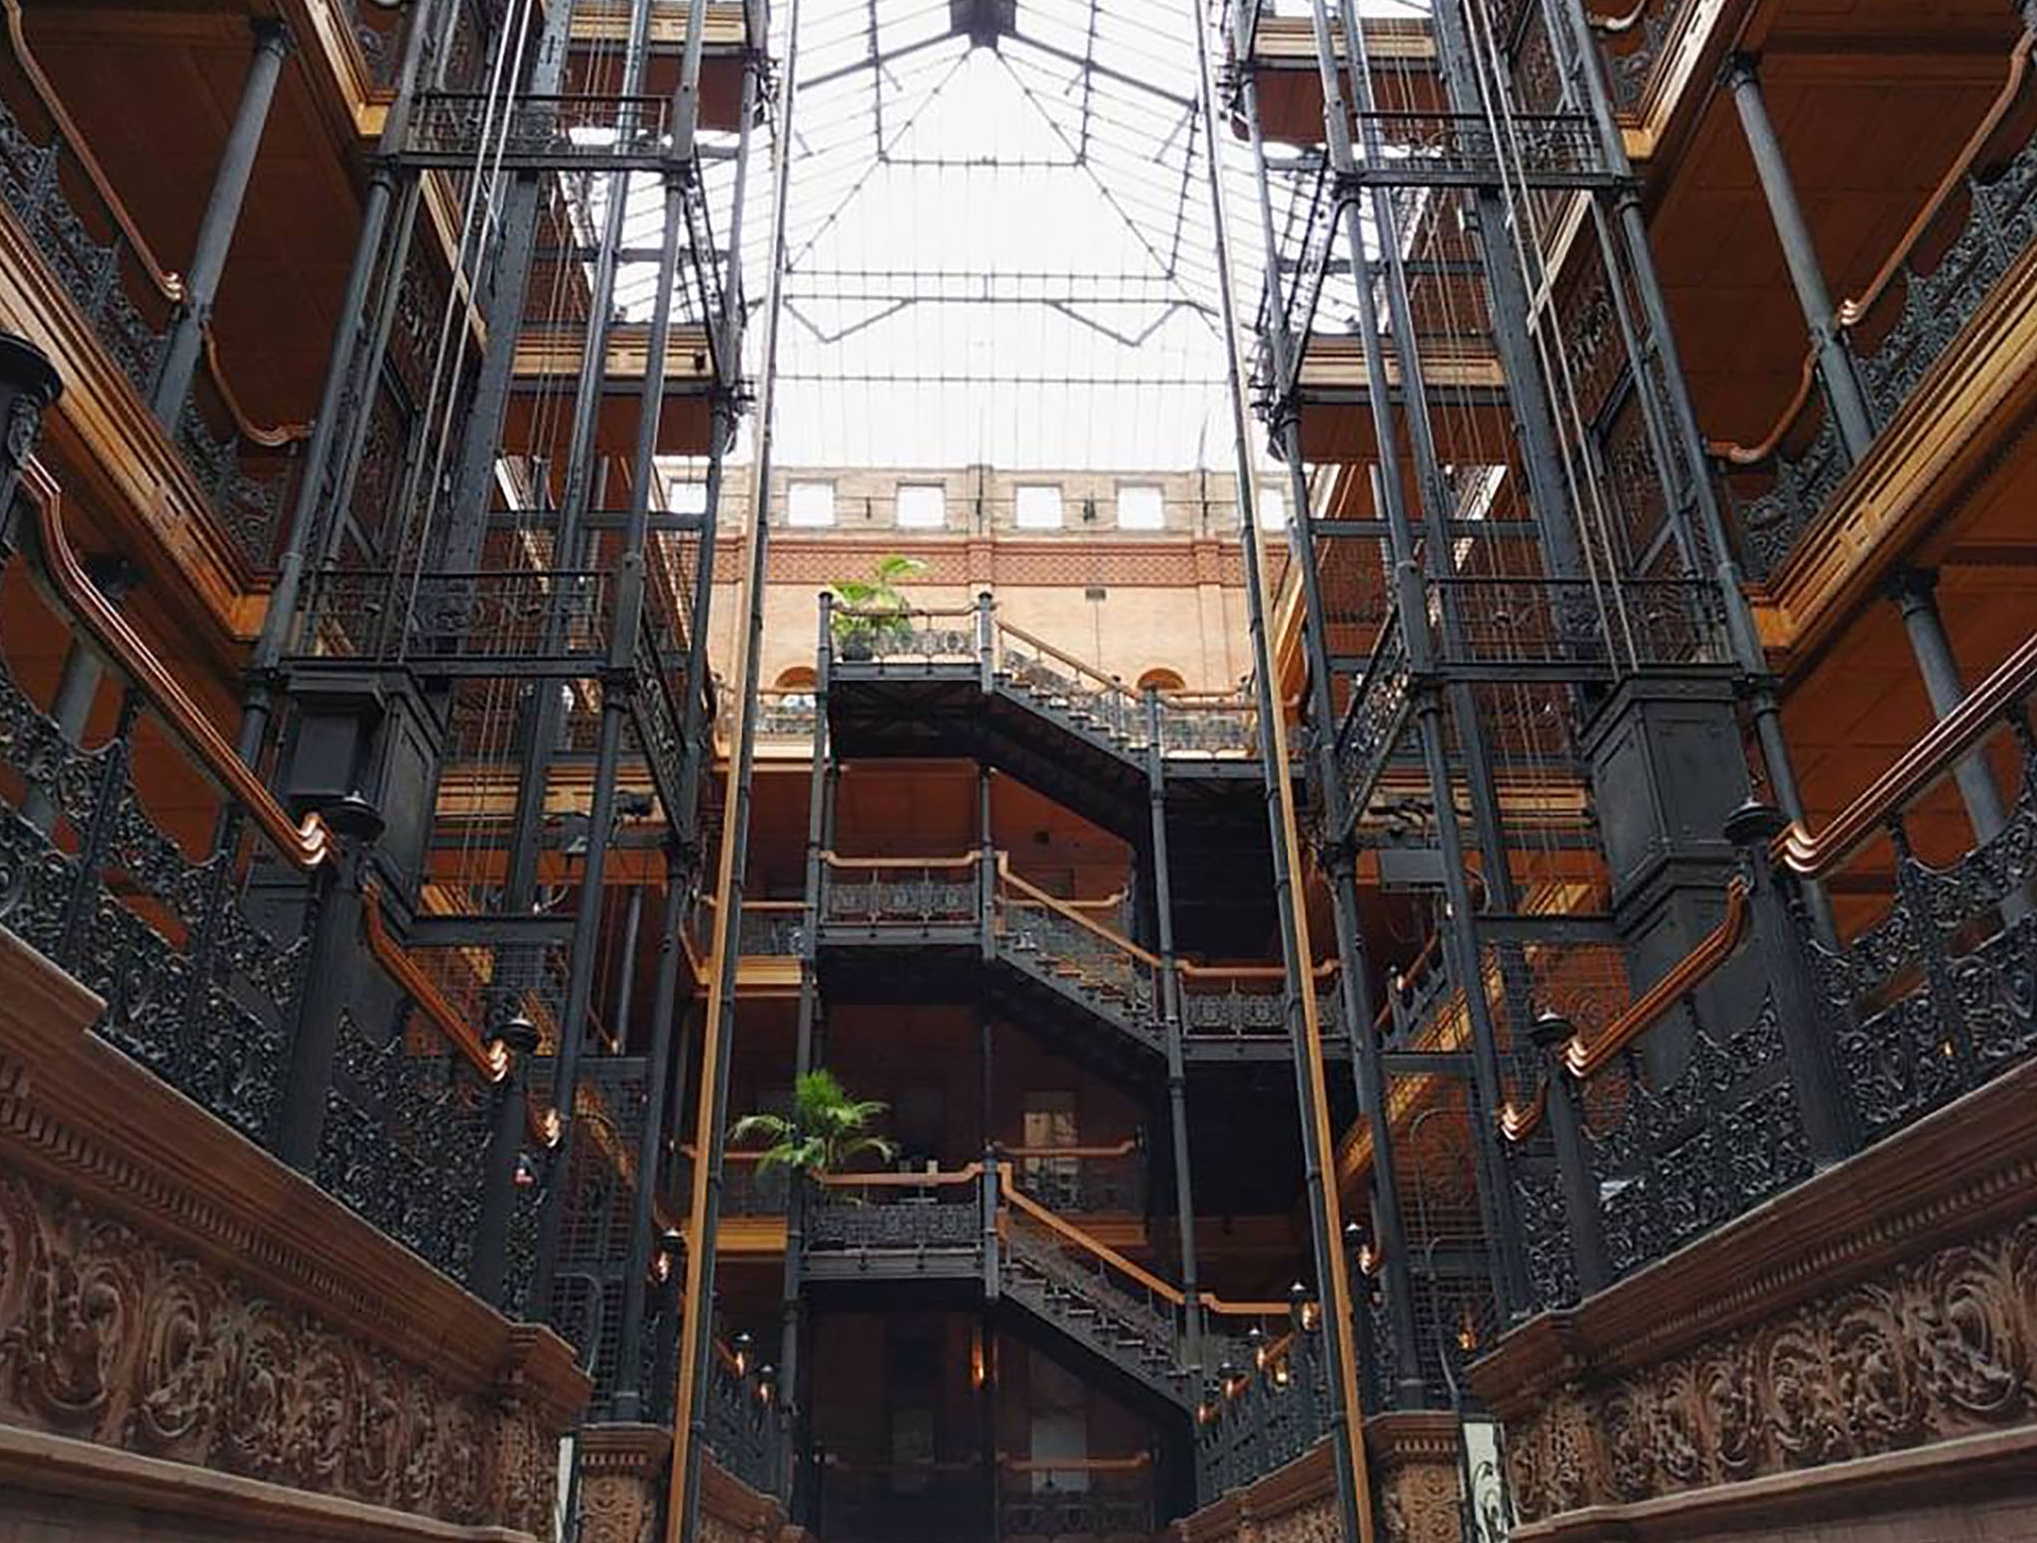 indoor view of building architecture made up of elaborate iron railings and a glass ceiling